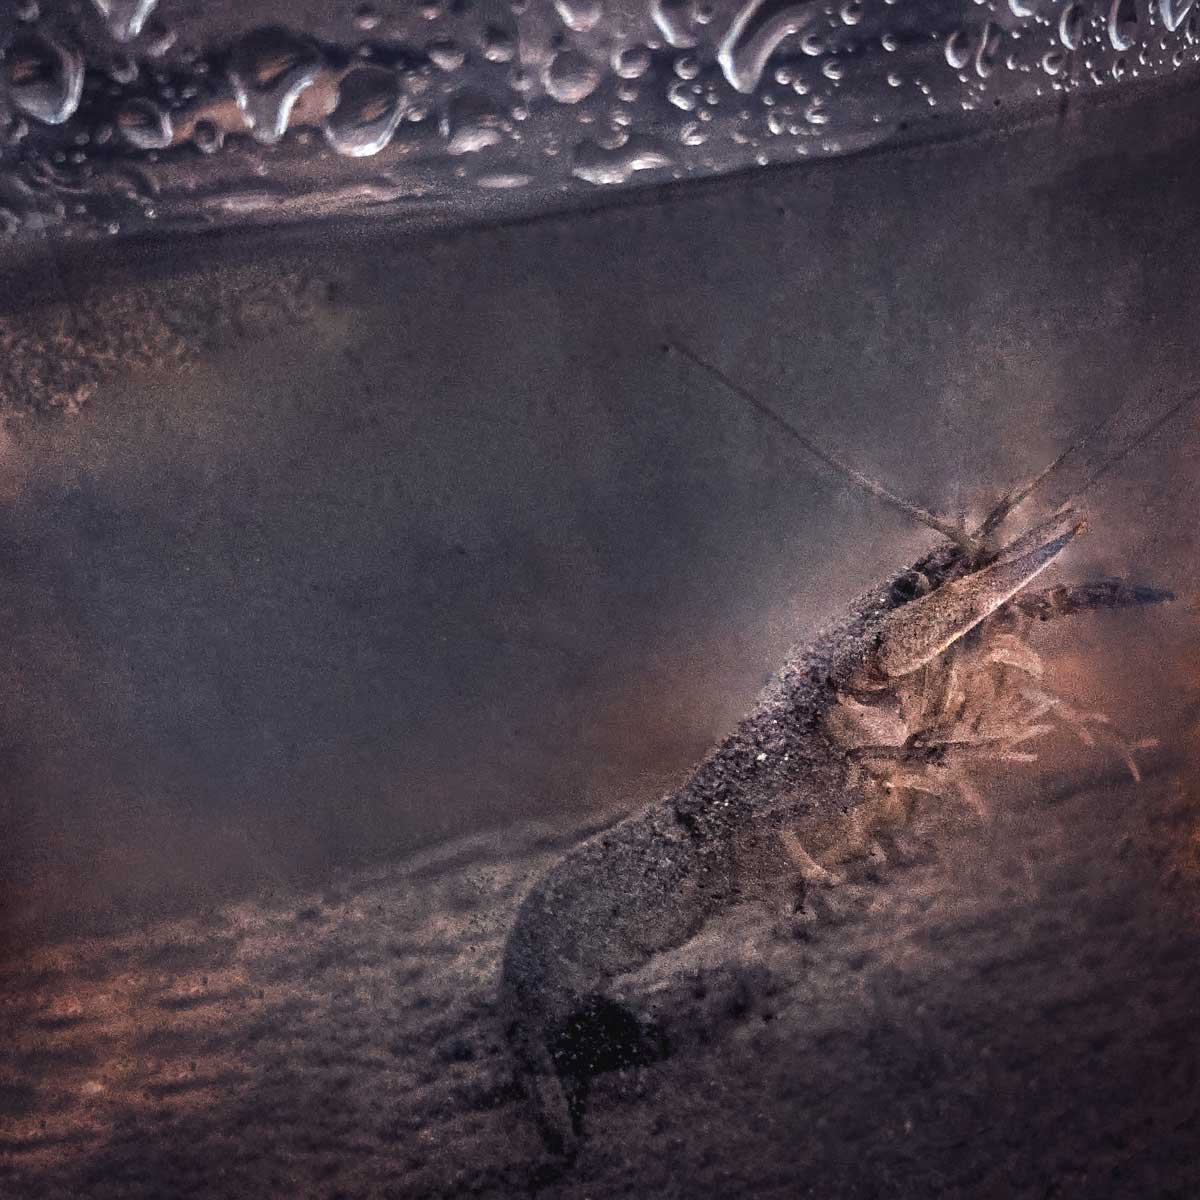 A close up of a crayfish in ash water reaching towards the surface of the water.